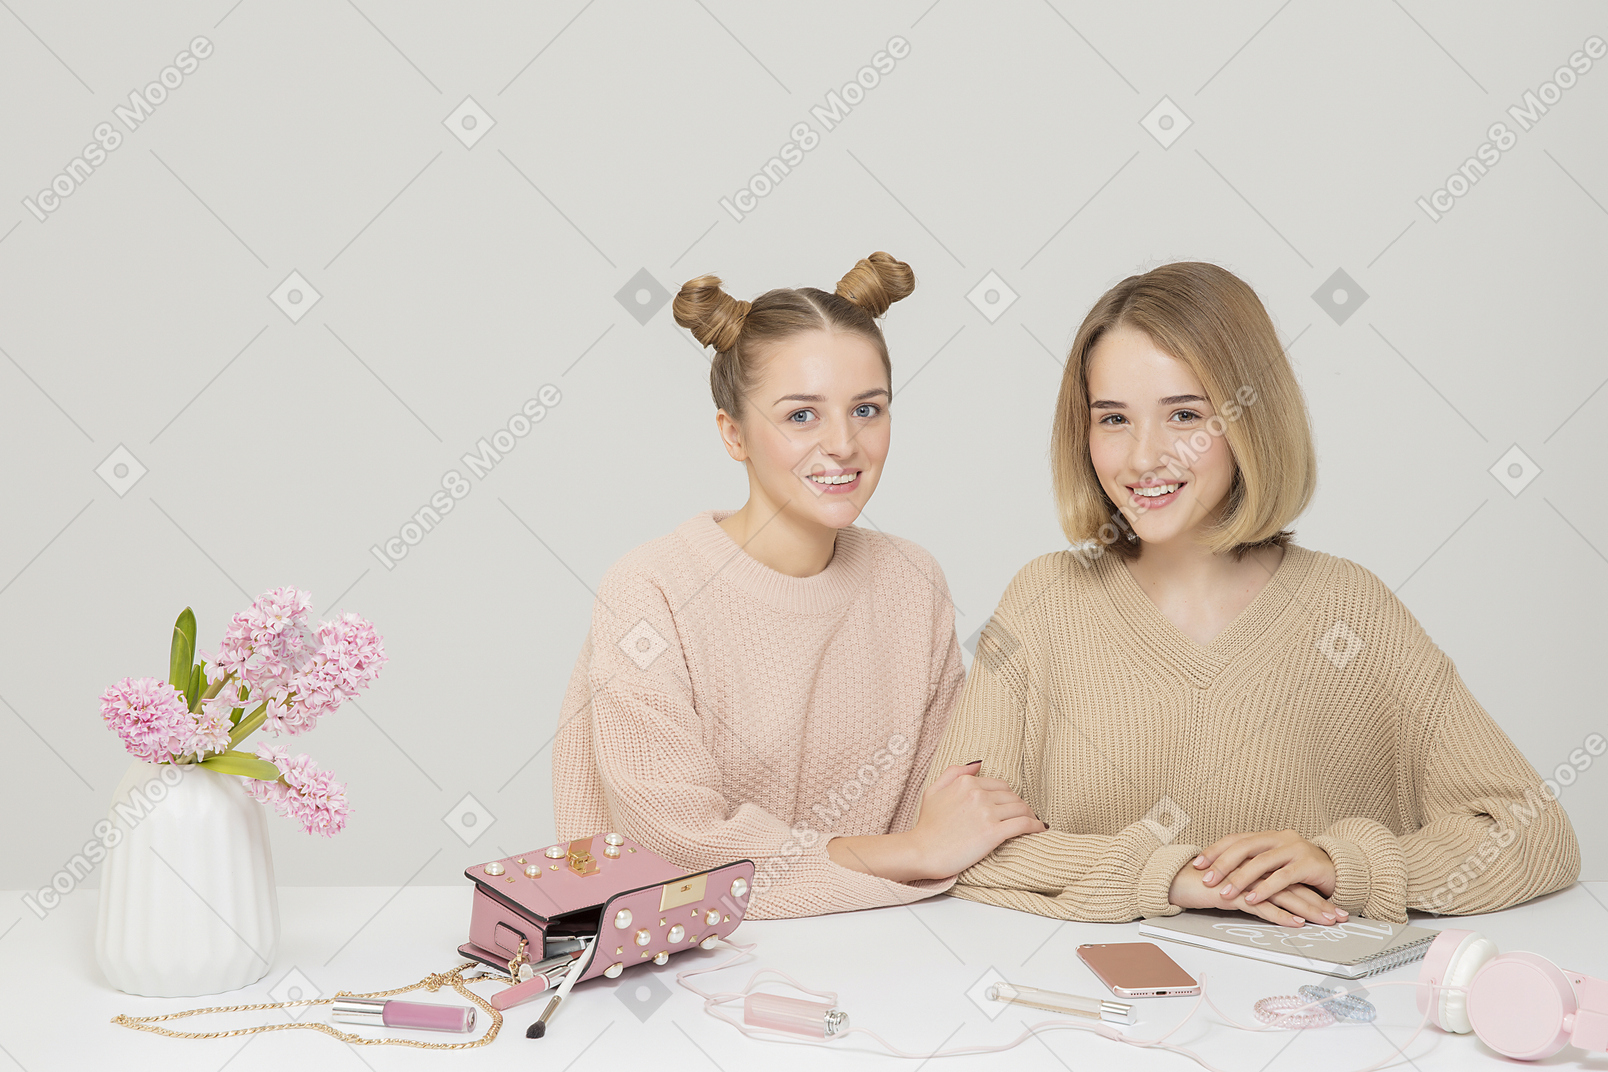 Two friends sitting at the disoraganized table